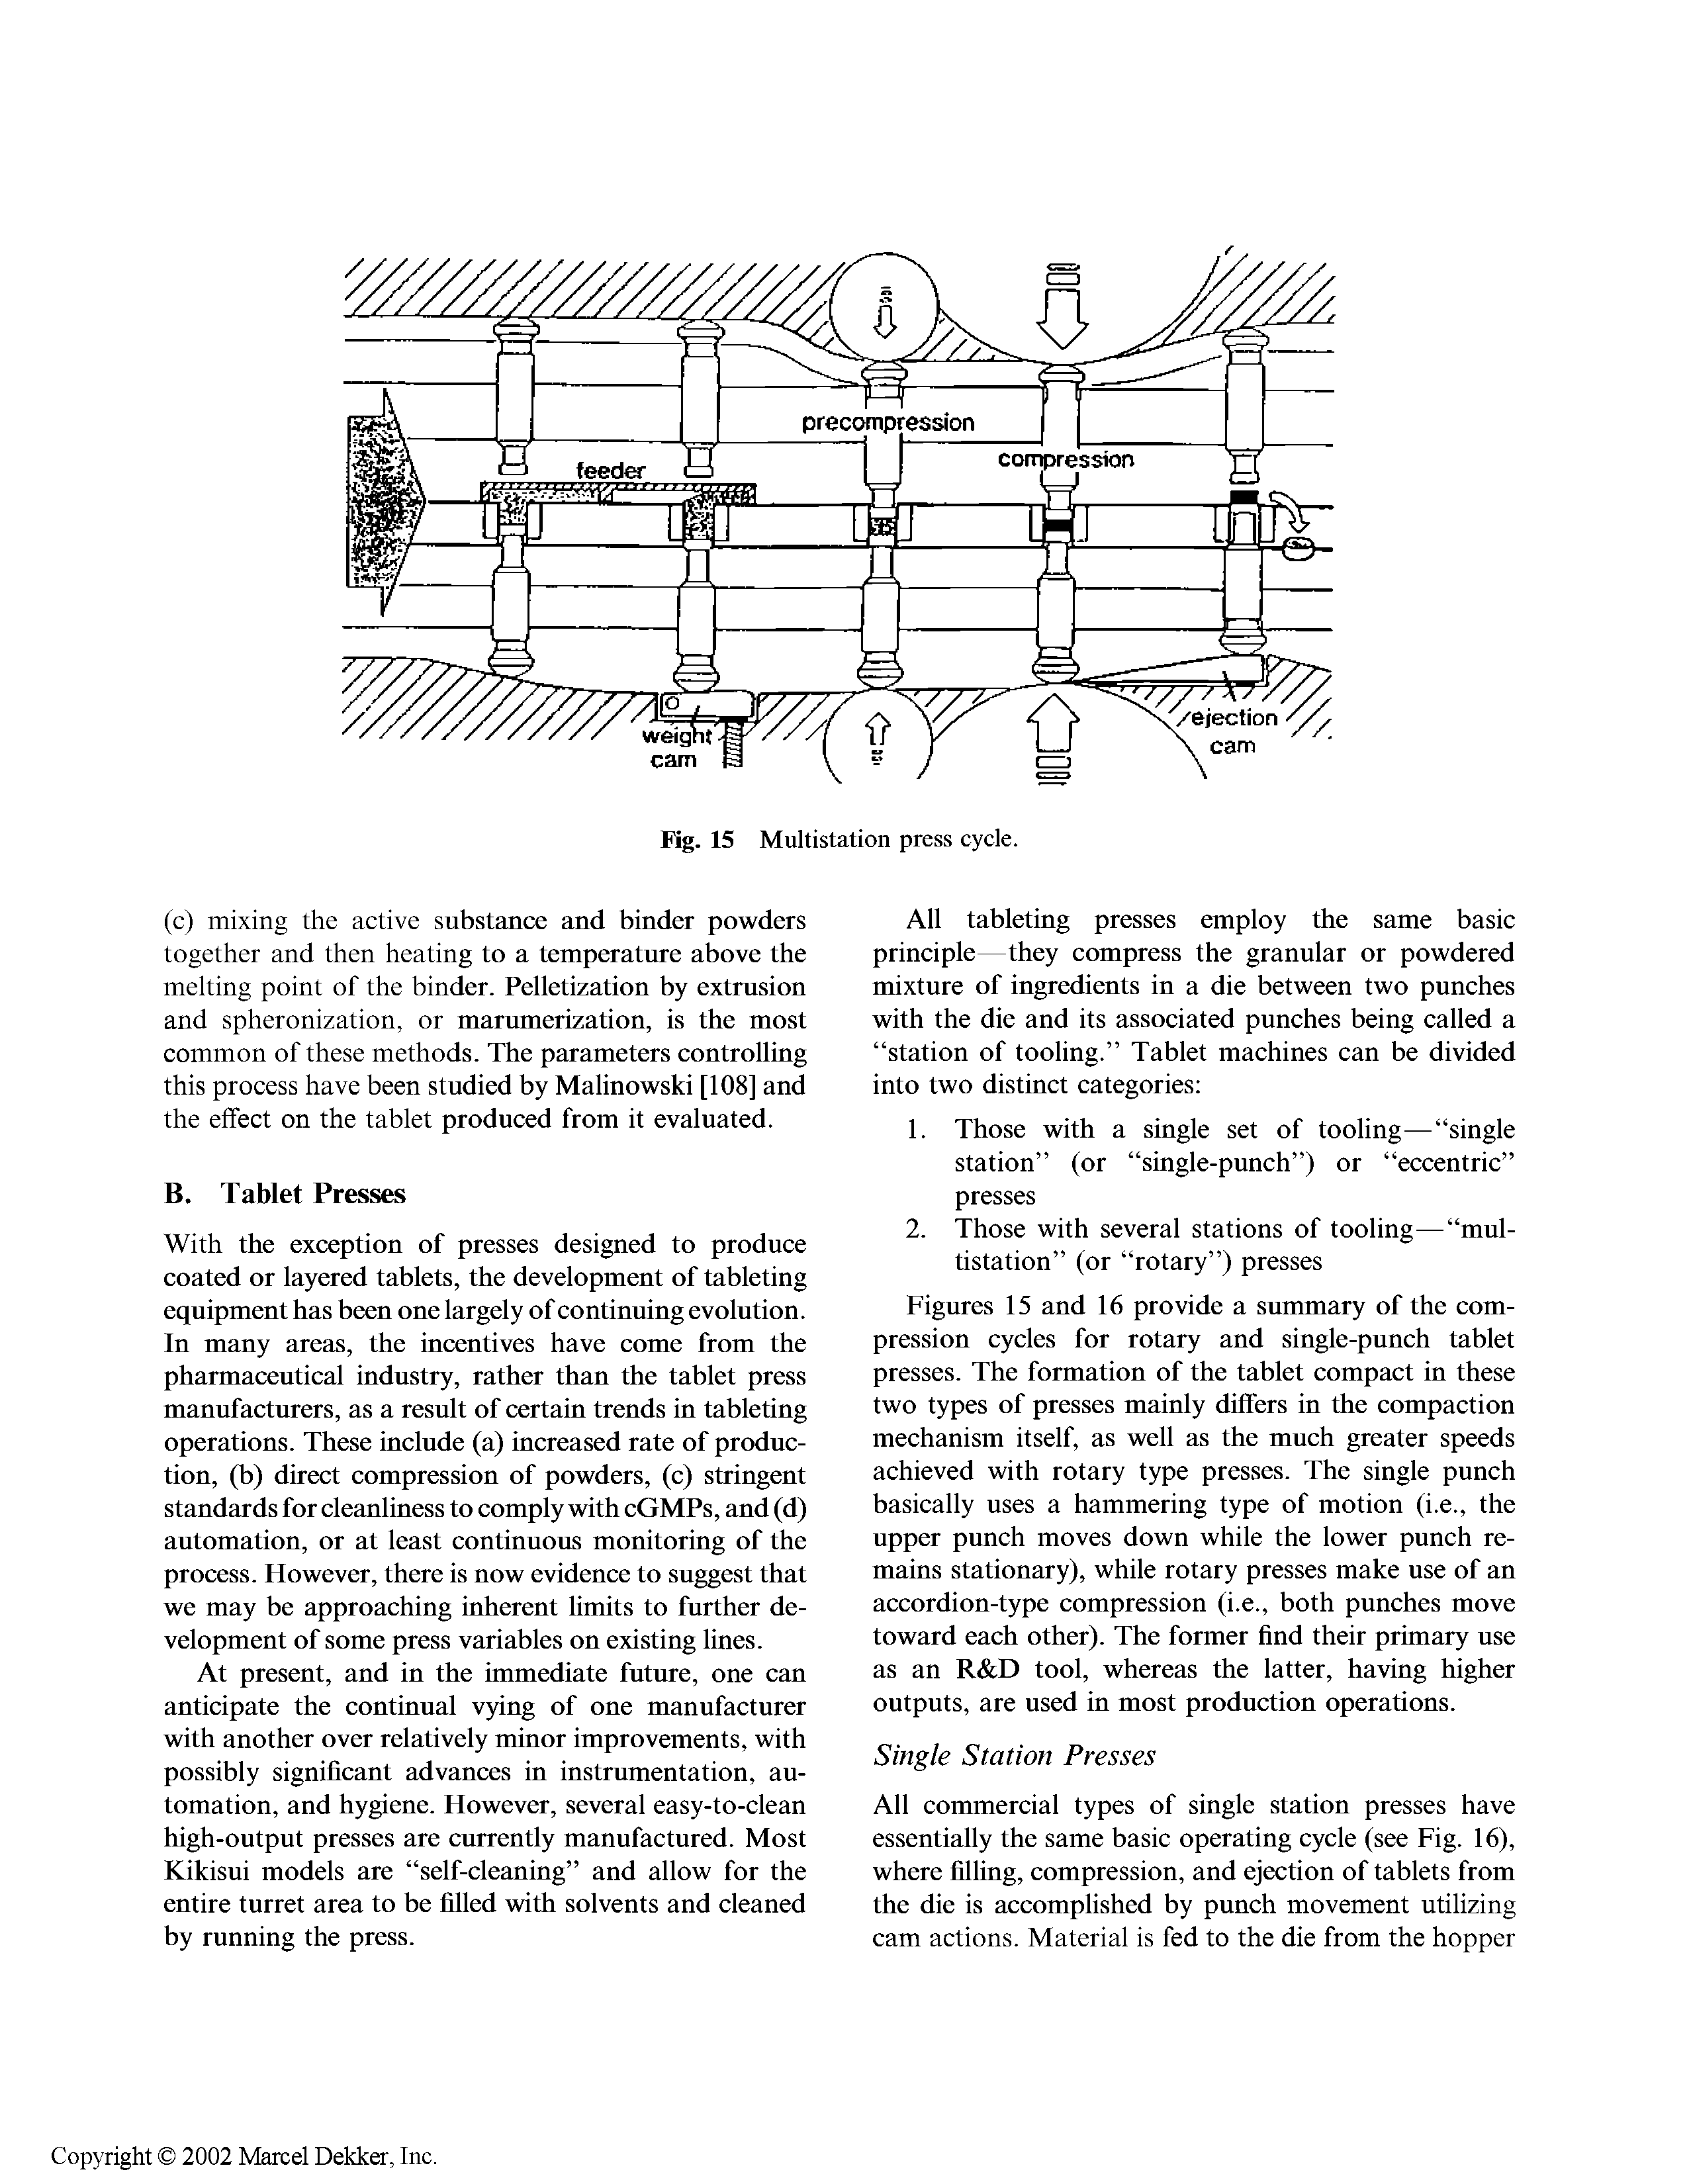 Figures 15 and 16 provide a summary of the compression cycles for rotary and single-punch tablet presses. The formation of the tablet compact in these two types of presses mainly differs in the compaction mechanism itself, as well as the much greater speeds achieved with rotary type presses. The single punch basically uses a hammering type of motion (i.e., the upper punch moves down while the lower punch remains stationary), while rotary presses make use of an accordion-type compression (i.e., both punches move toward each other). The former find their primary use as an R D tool, whereas the latter, having higher outputs, are used in most production operations.